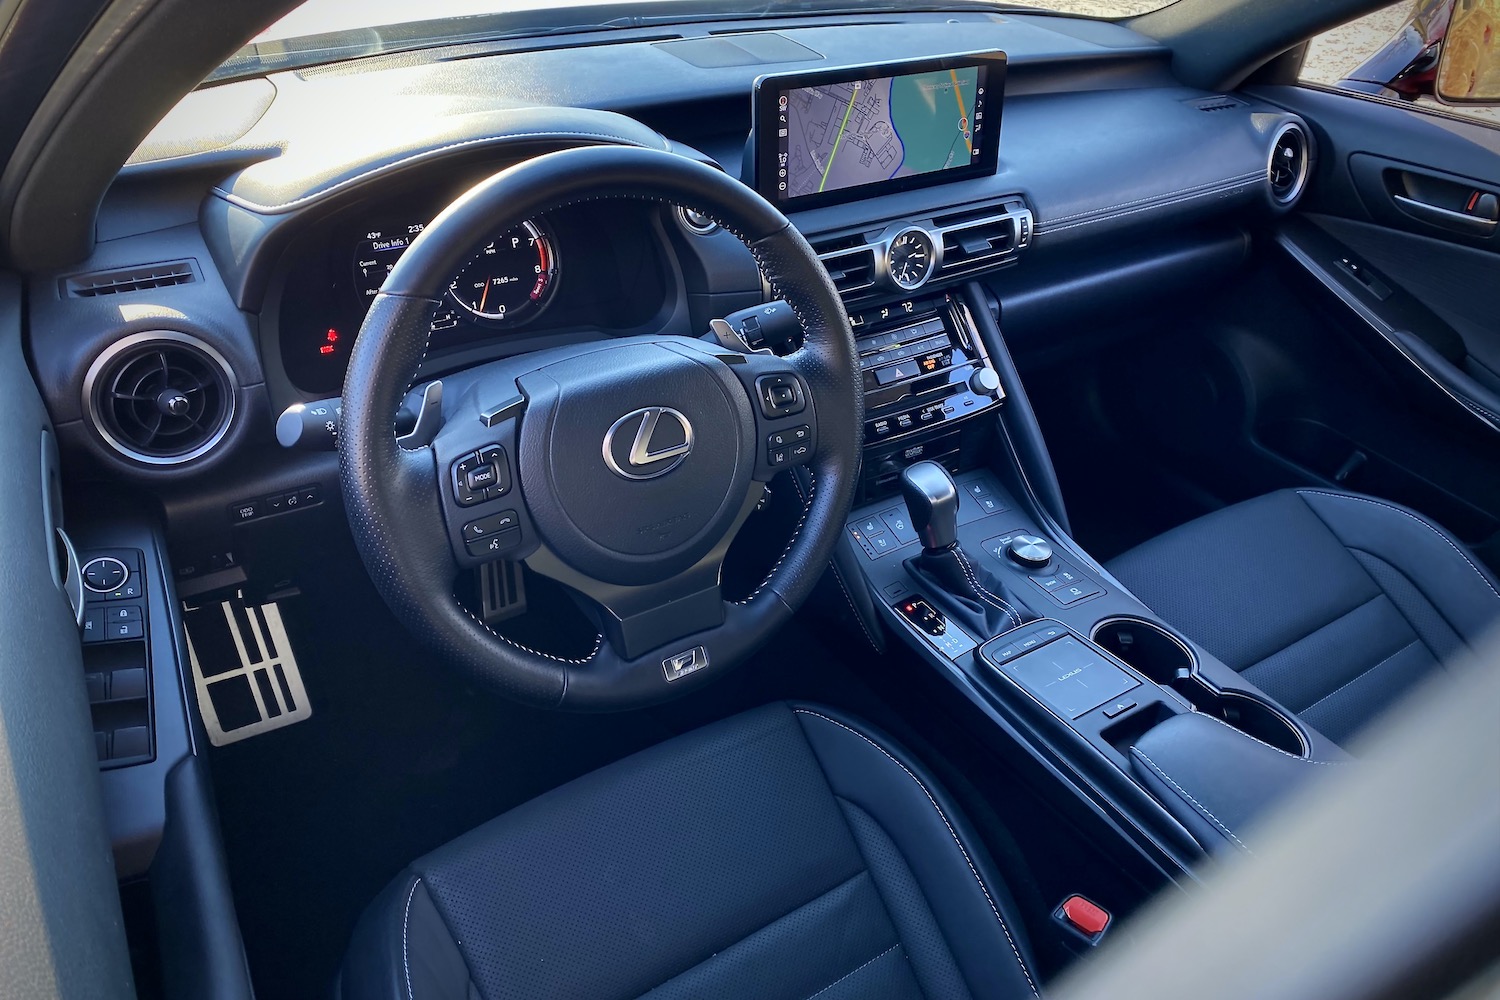 Lexus IS 500 dashboard from driver's seat from above.